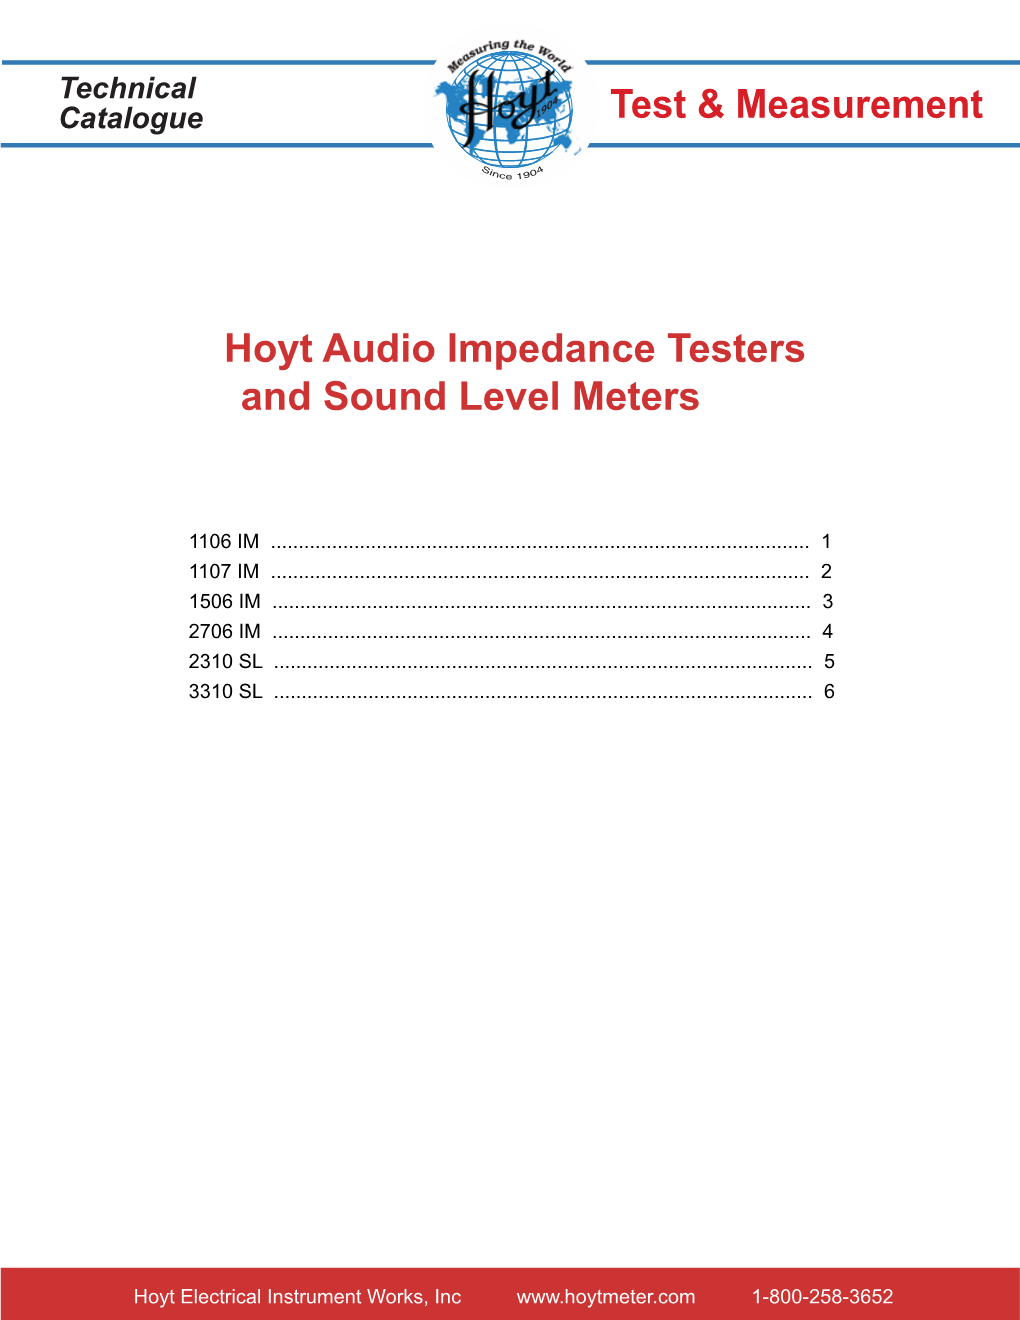 Audio Impedance Testers and Sound Level Meters